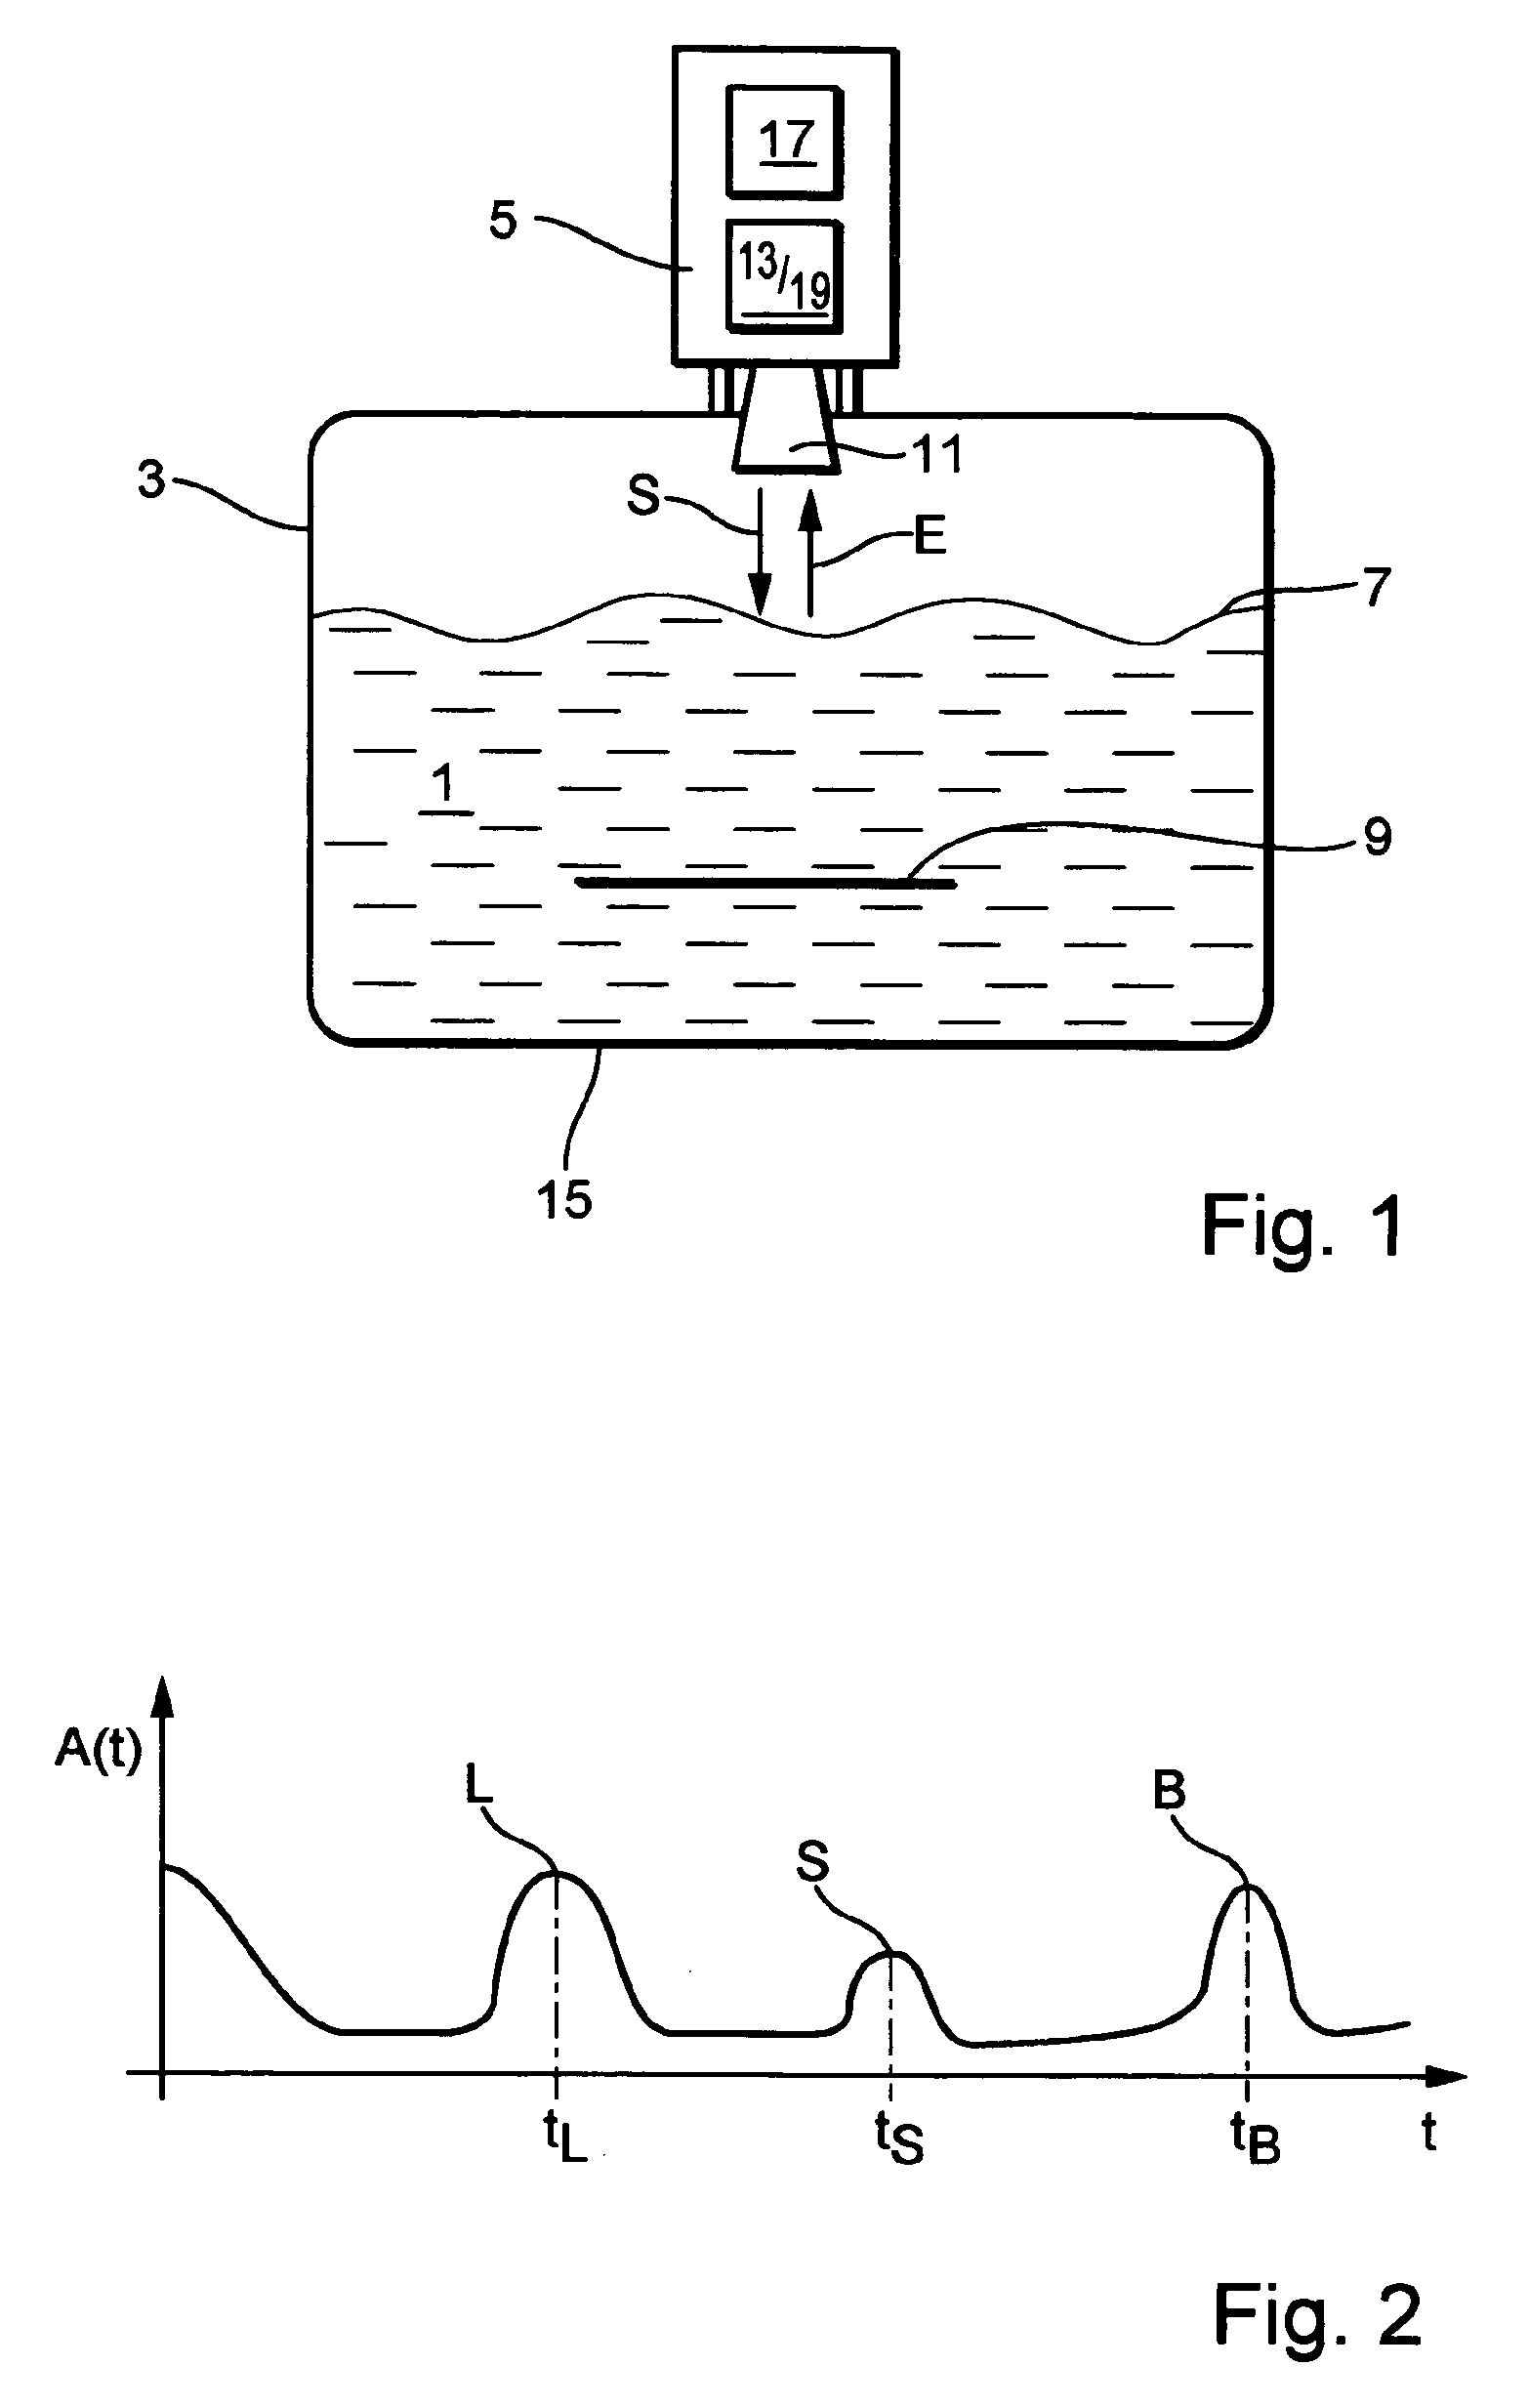 Fill level measuring device and method for fill level measurement using the travel time principle